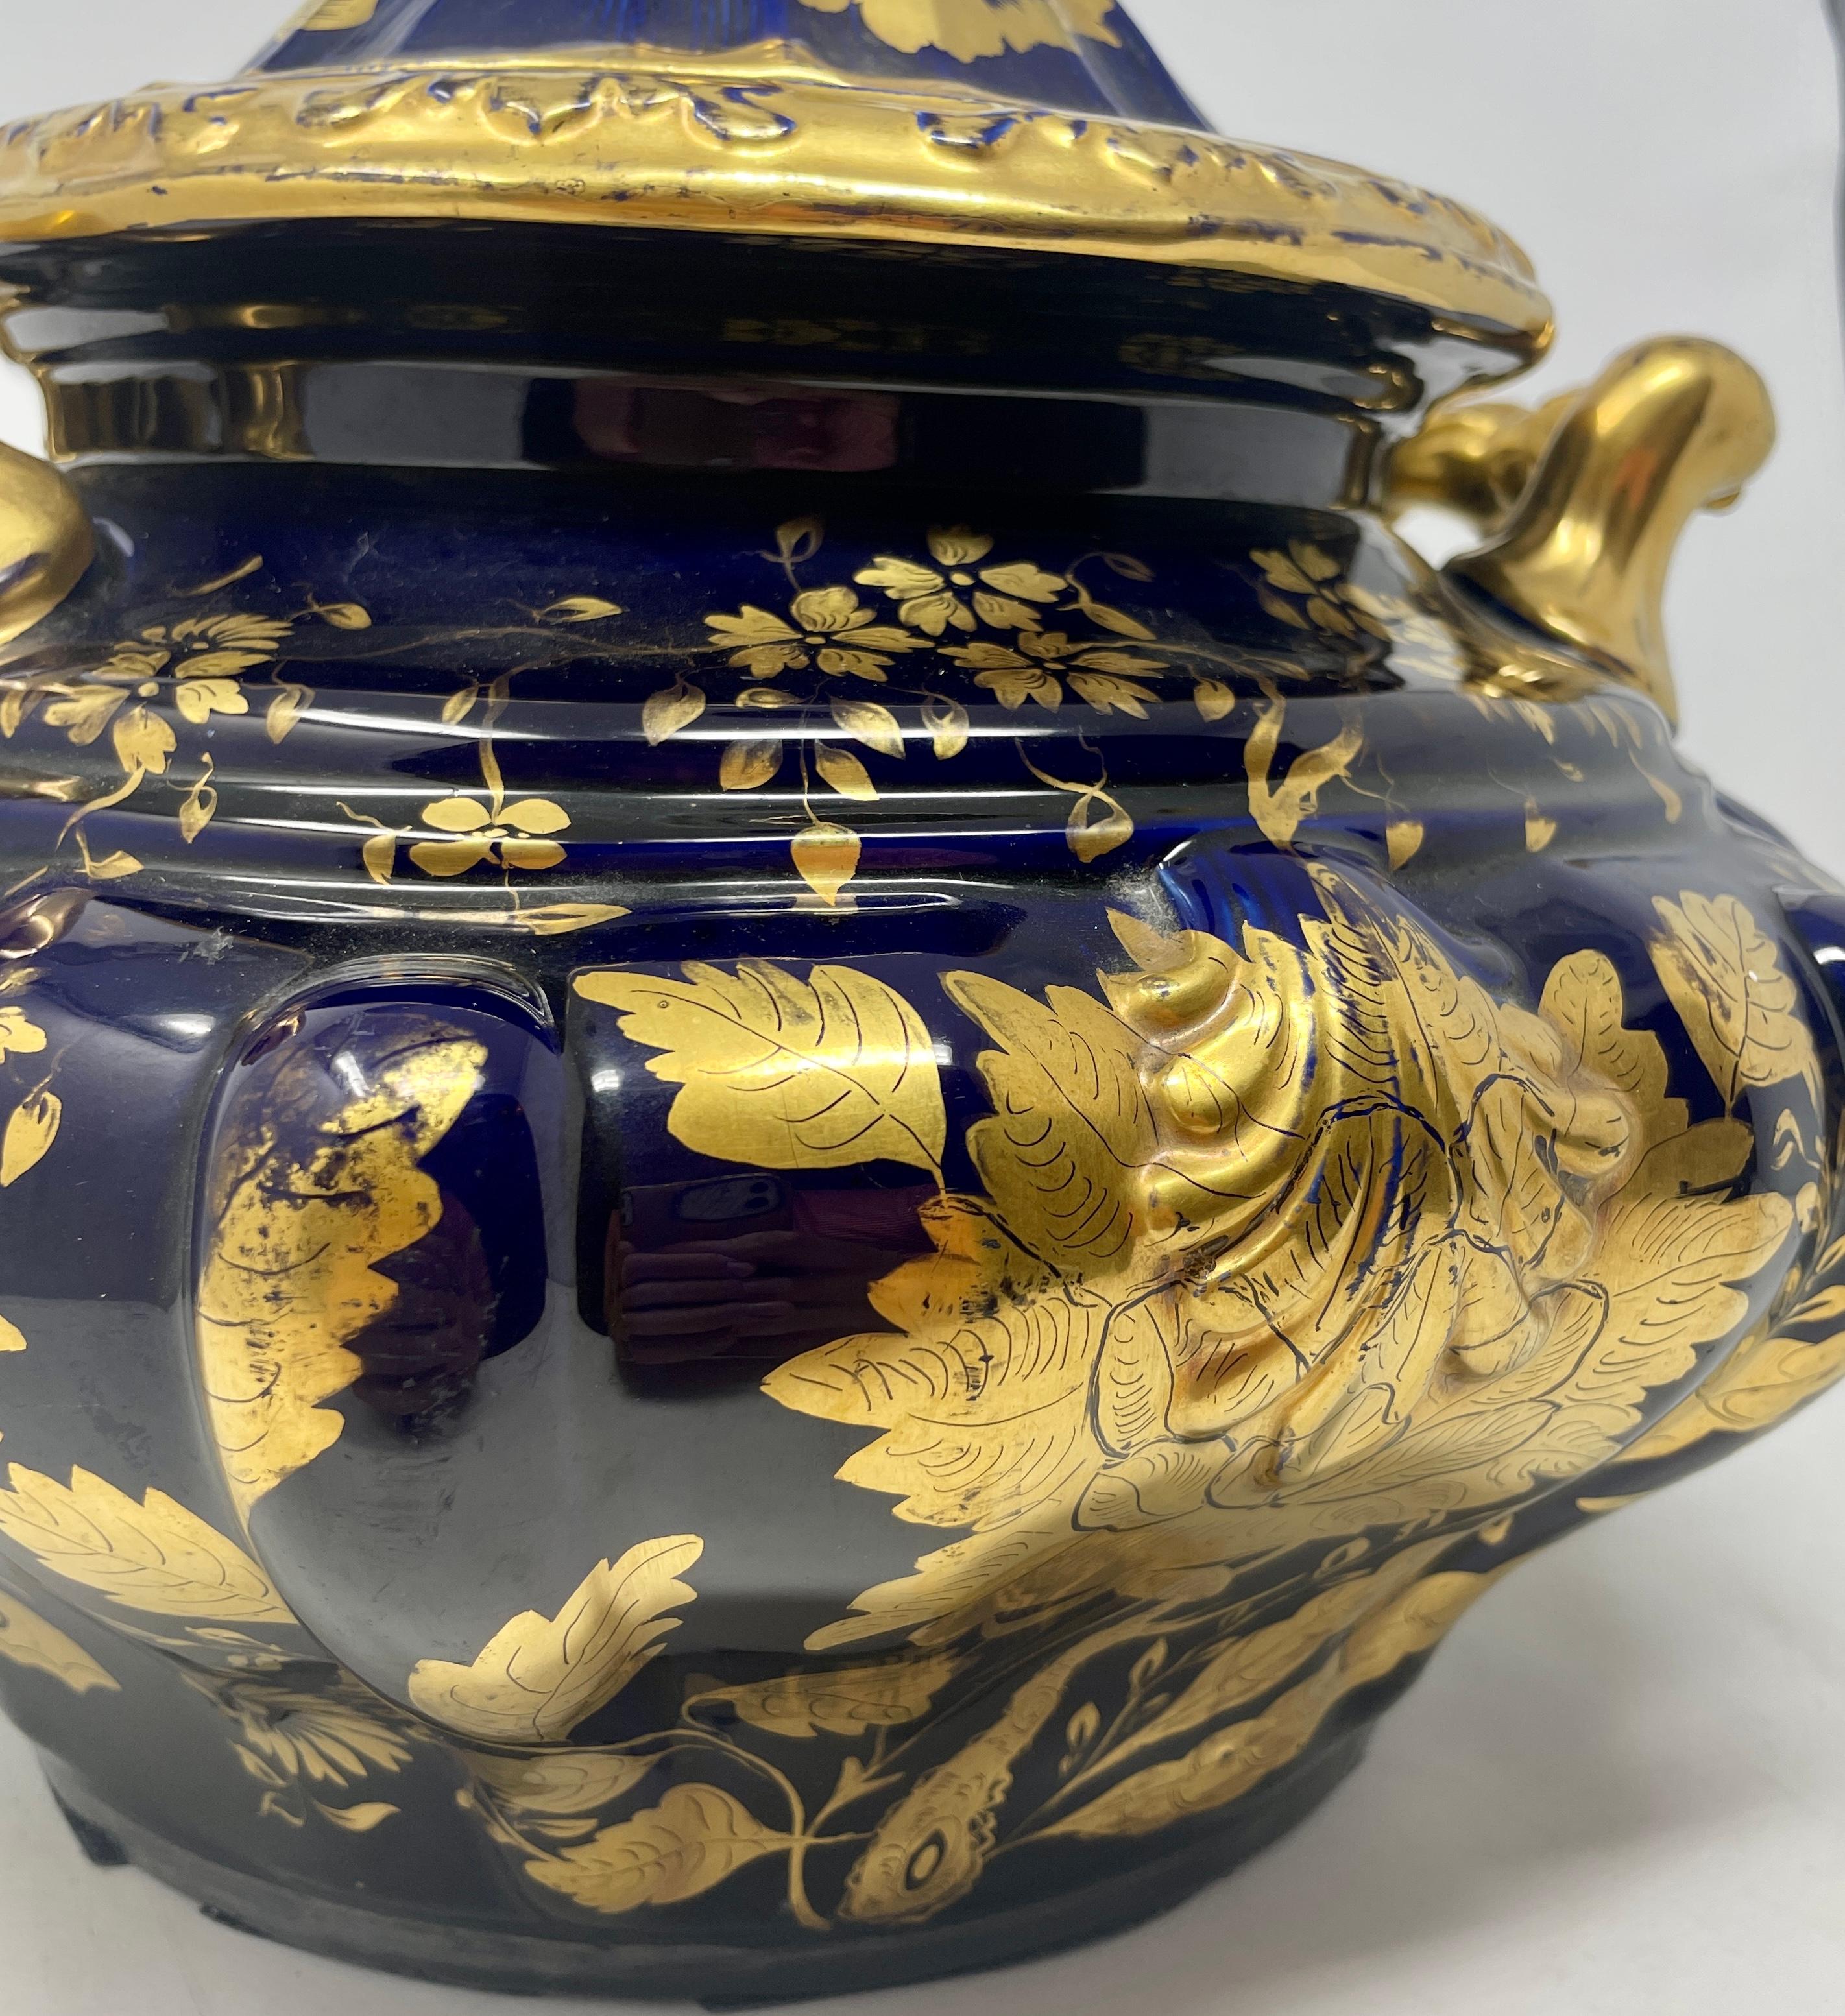 Antique English Cobalt and Gold Ironstone Tureen, circa 1840 For Sale 6